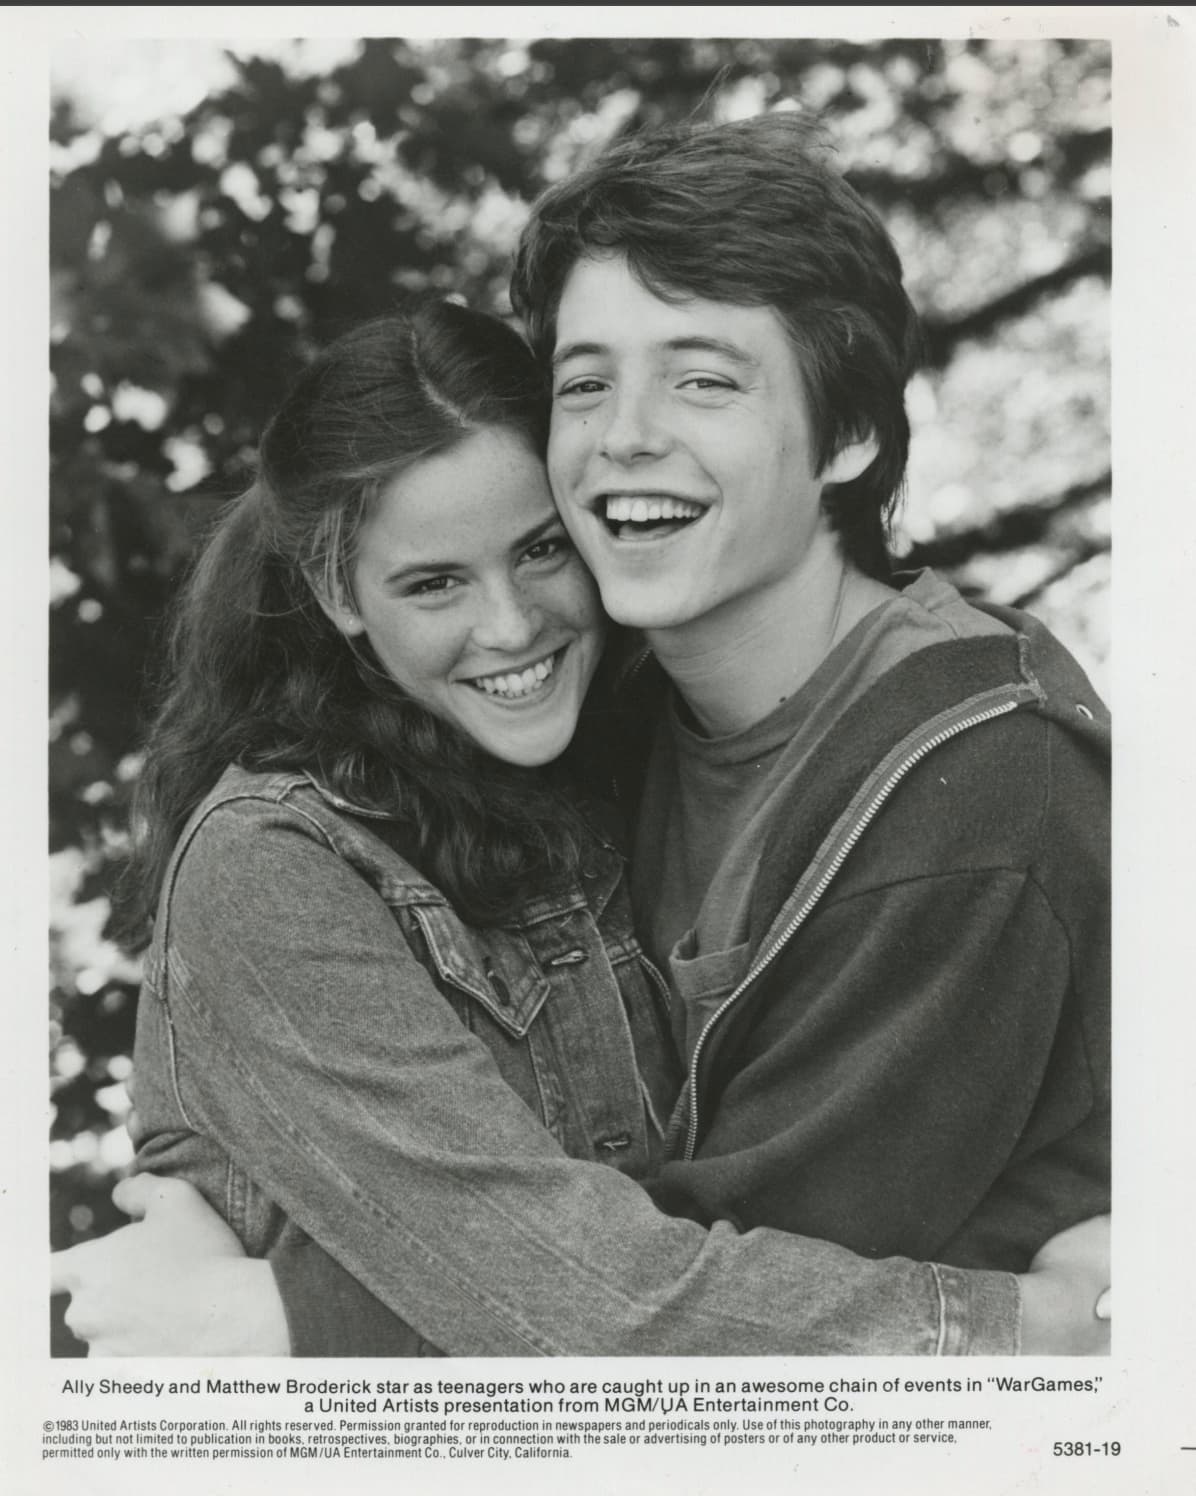 Ally Sheedy and Matthew Broderick star as teenagers who are caught up in an awesome chain of events in "WarGames," a United Artists presentation from MgmUa Entertainment Co. 1983 United Artists Corporation. All rights reserved. Permission granted for…